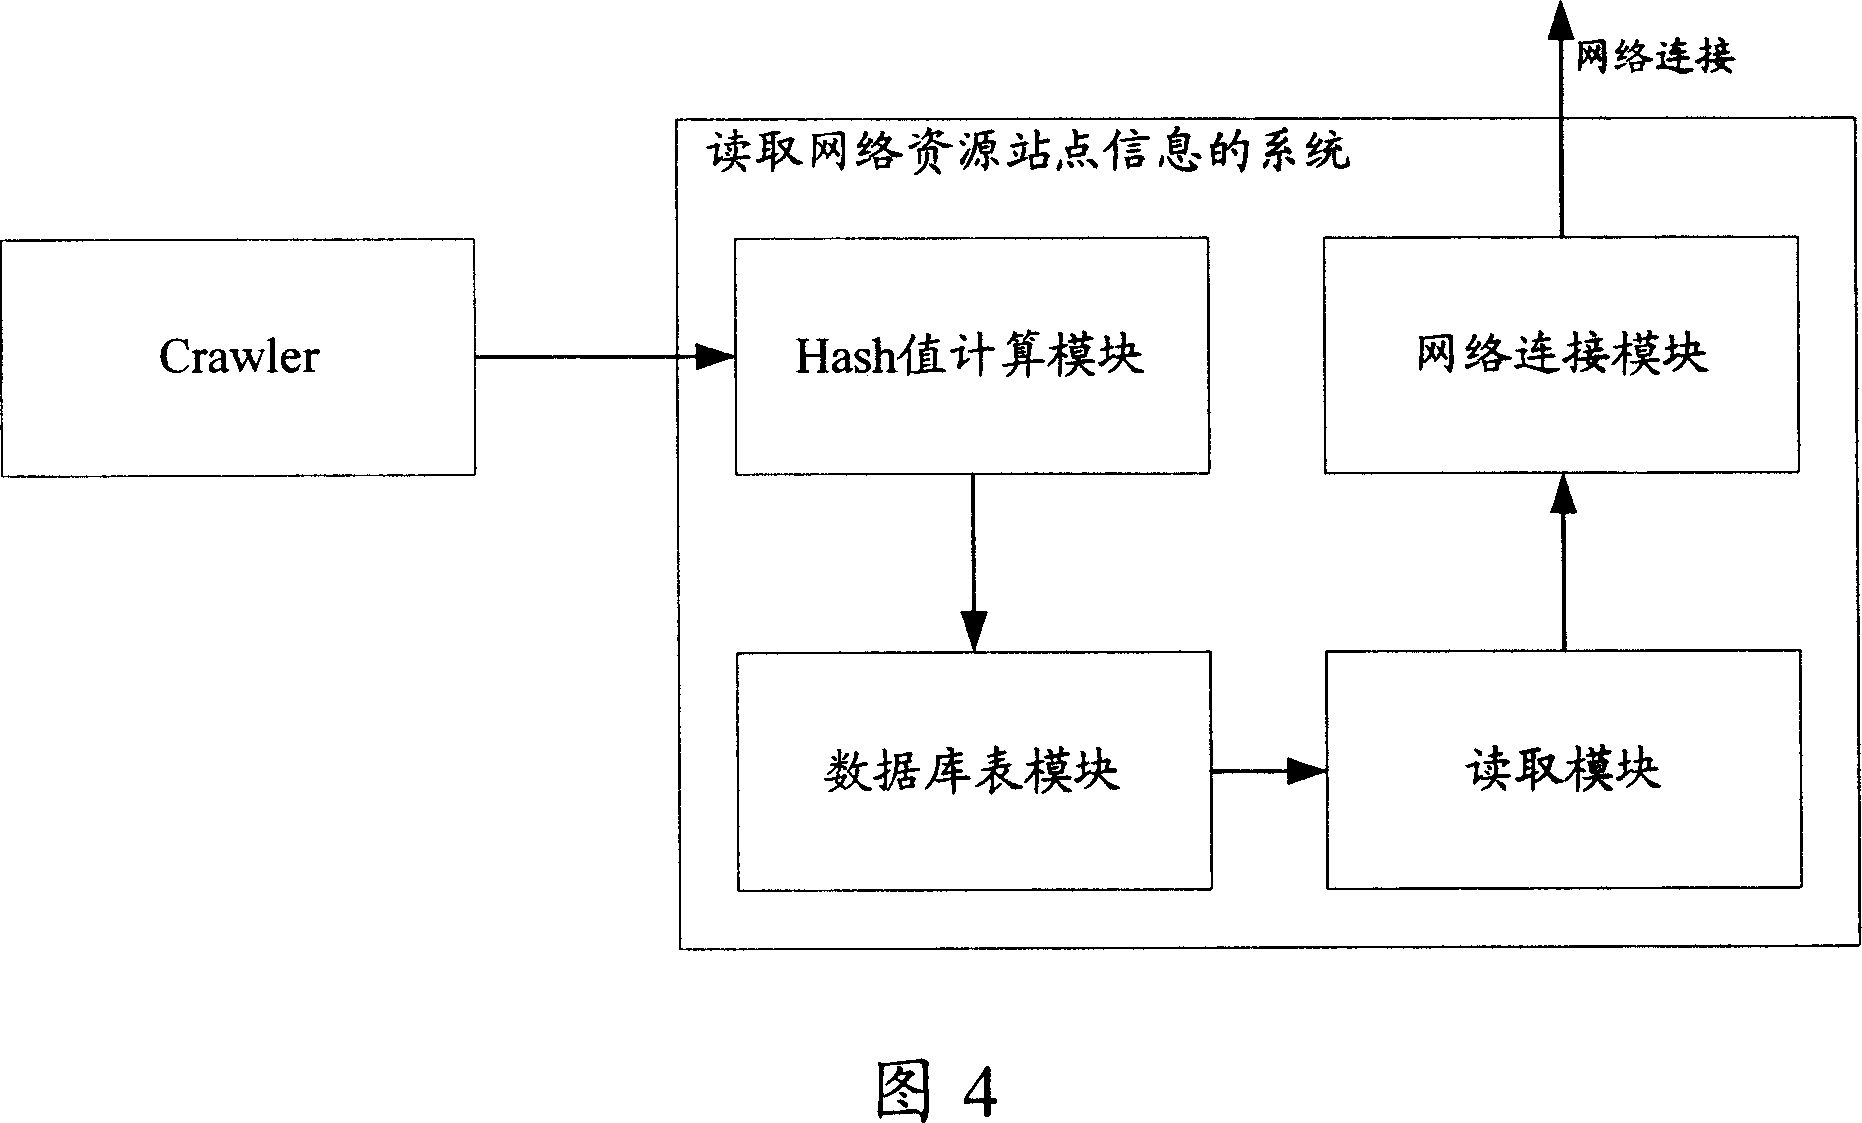 Method and system for reading information at network resource site, and searching engine